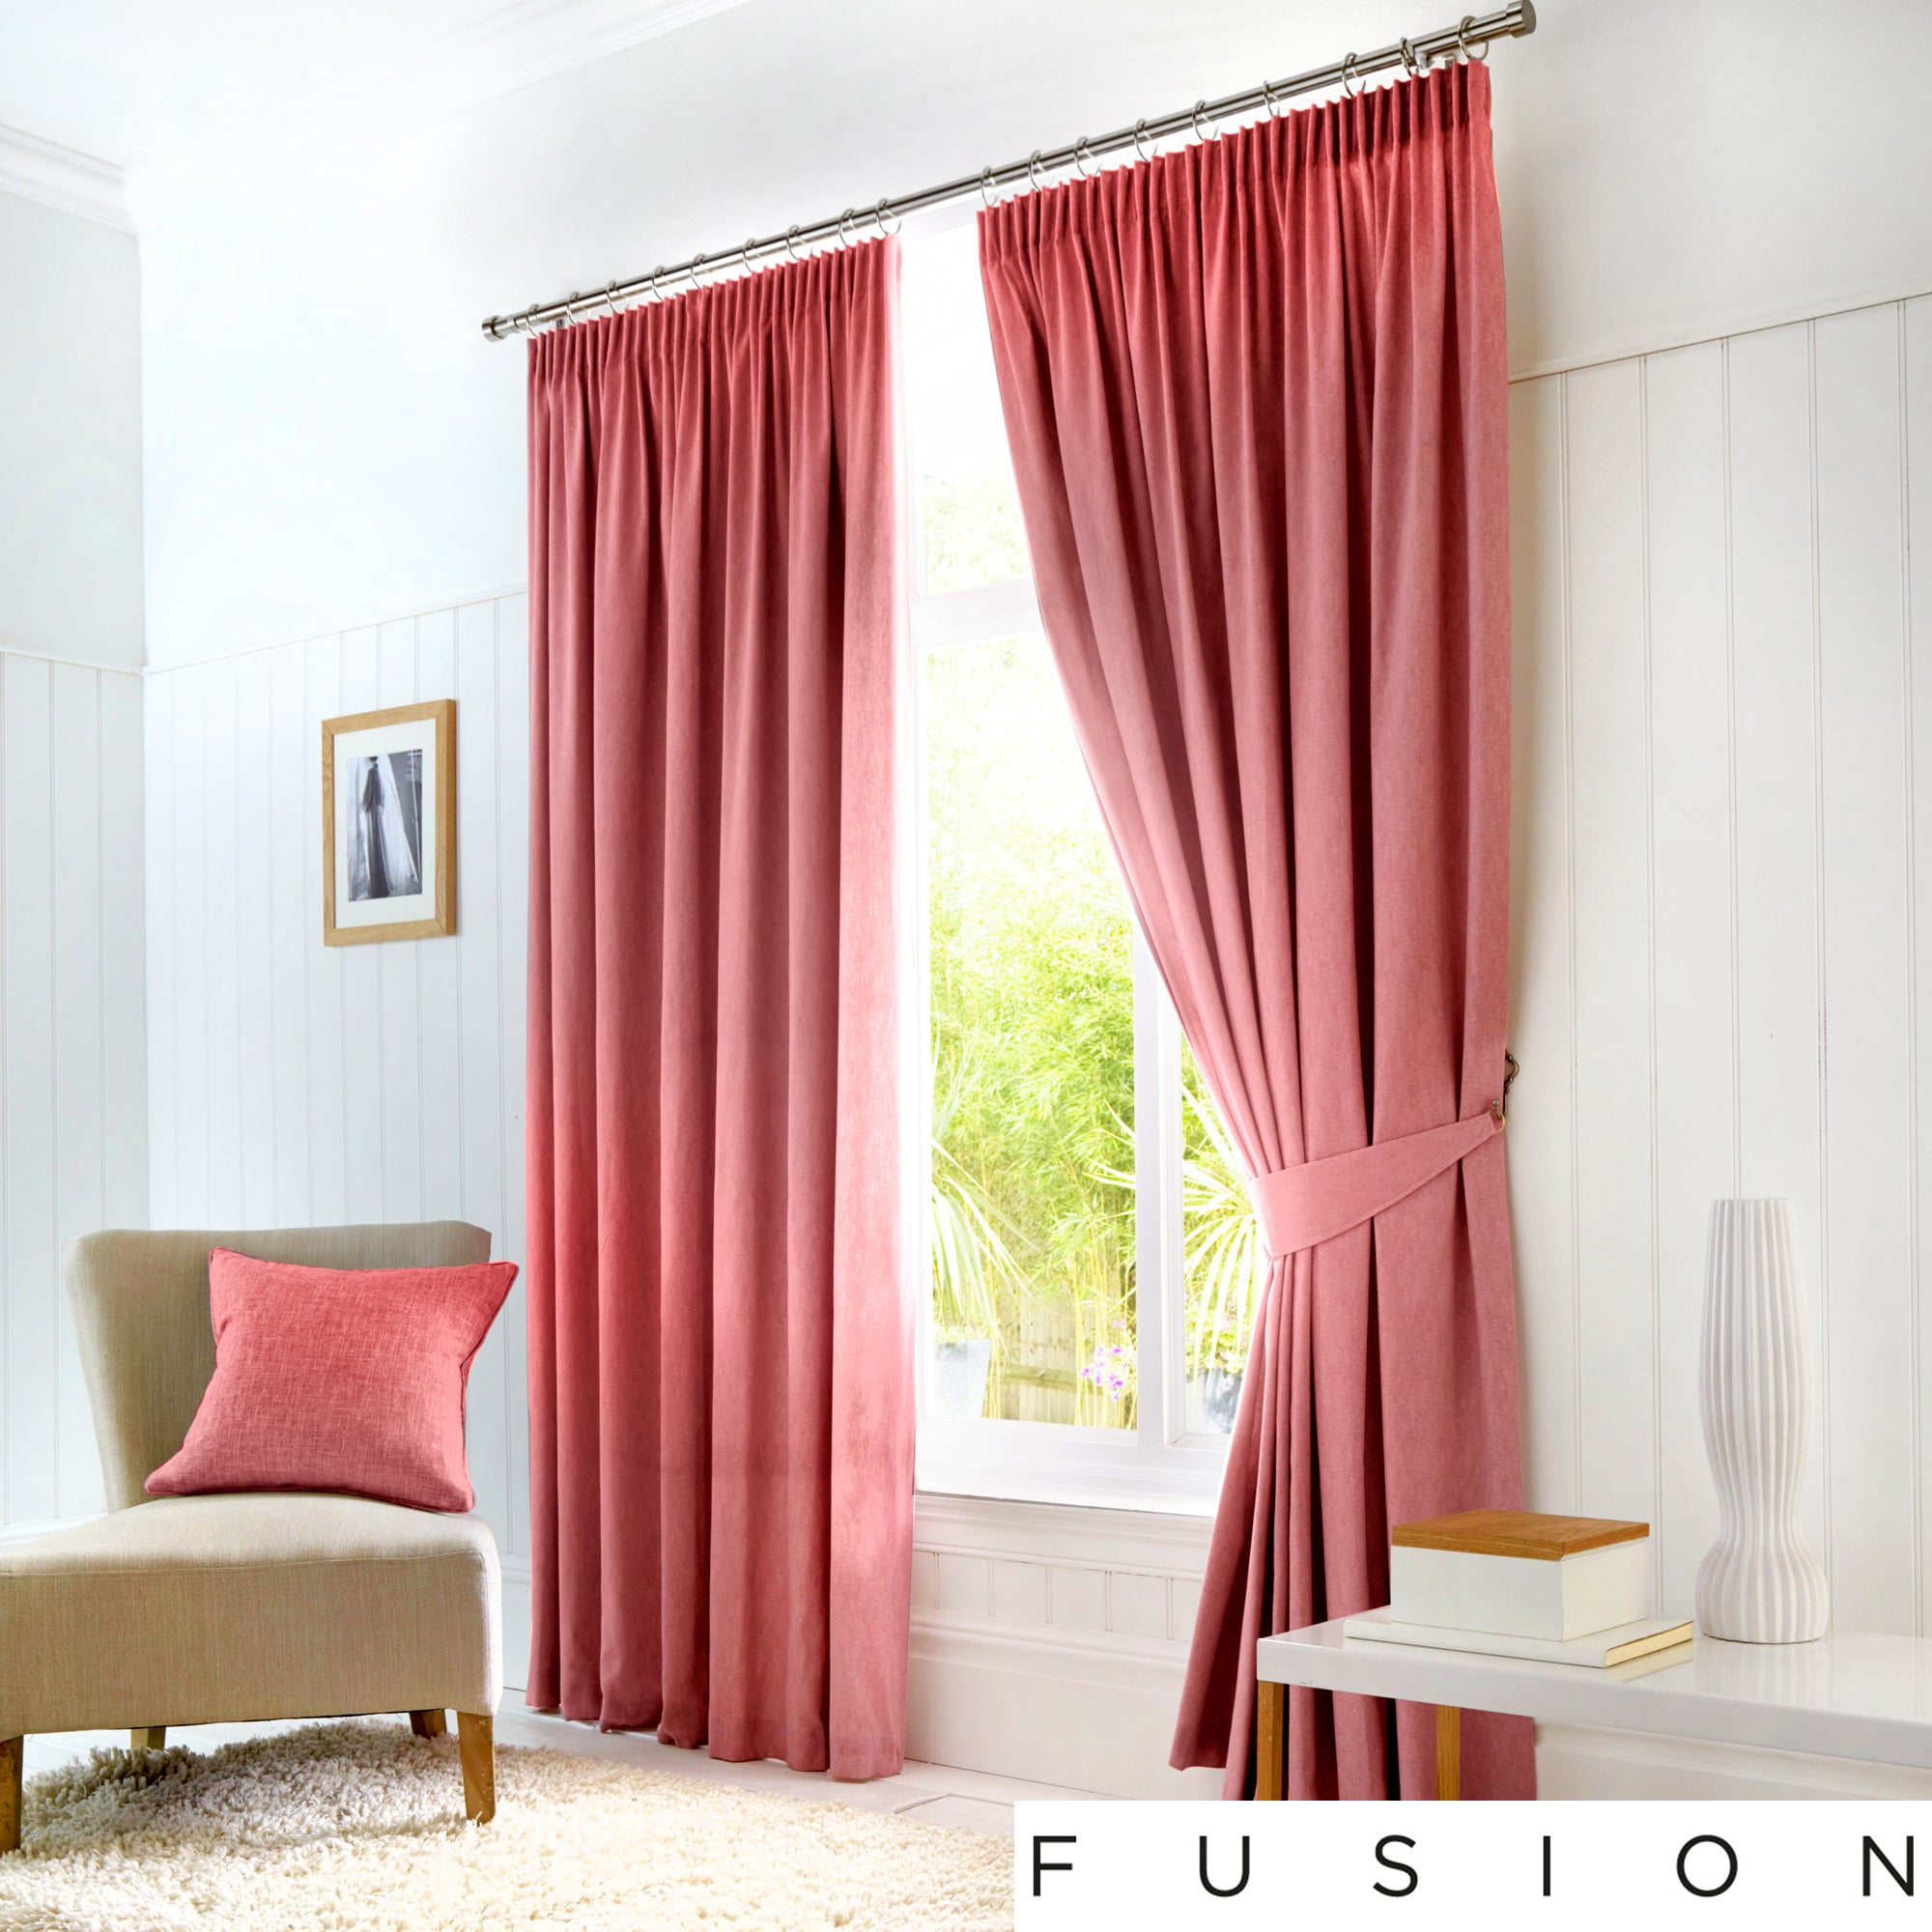 Dijon - Blackout Pair of Pencil Pleat Curtains in Blush - by Fusion